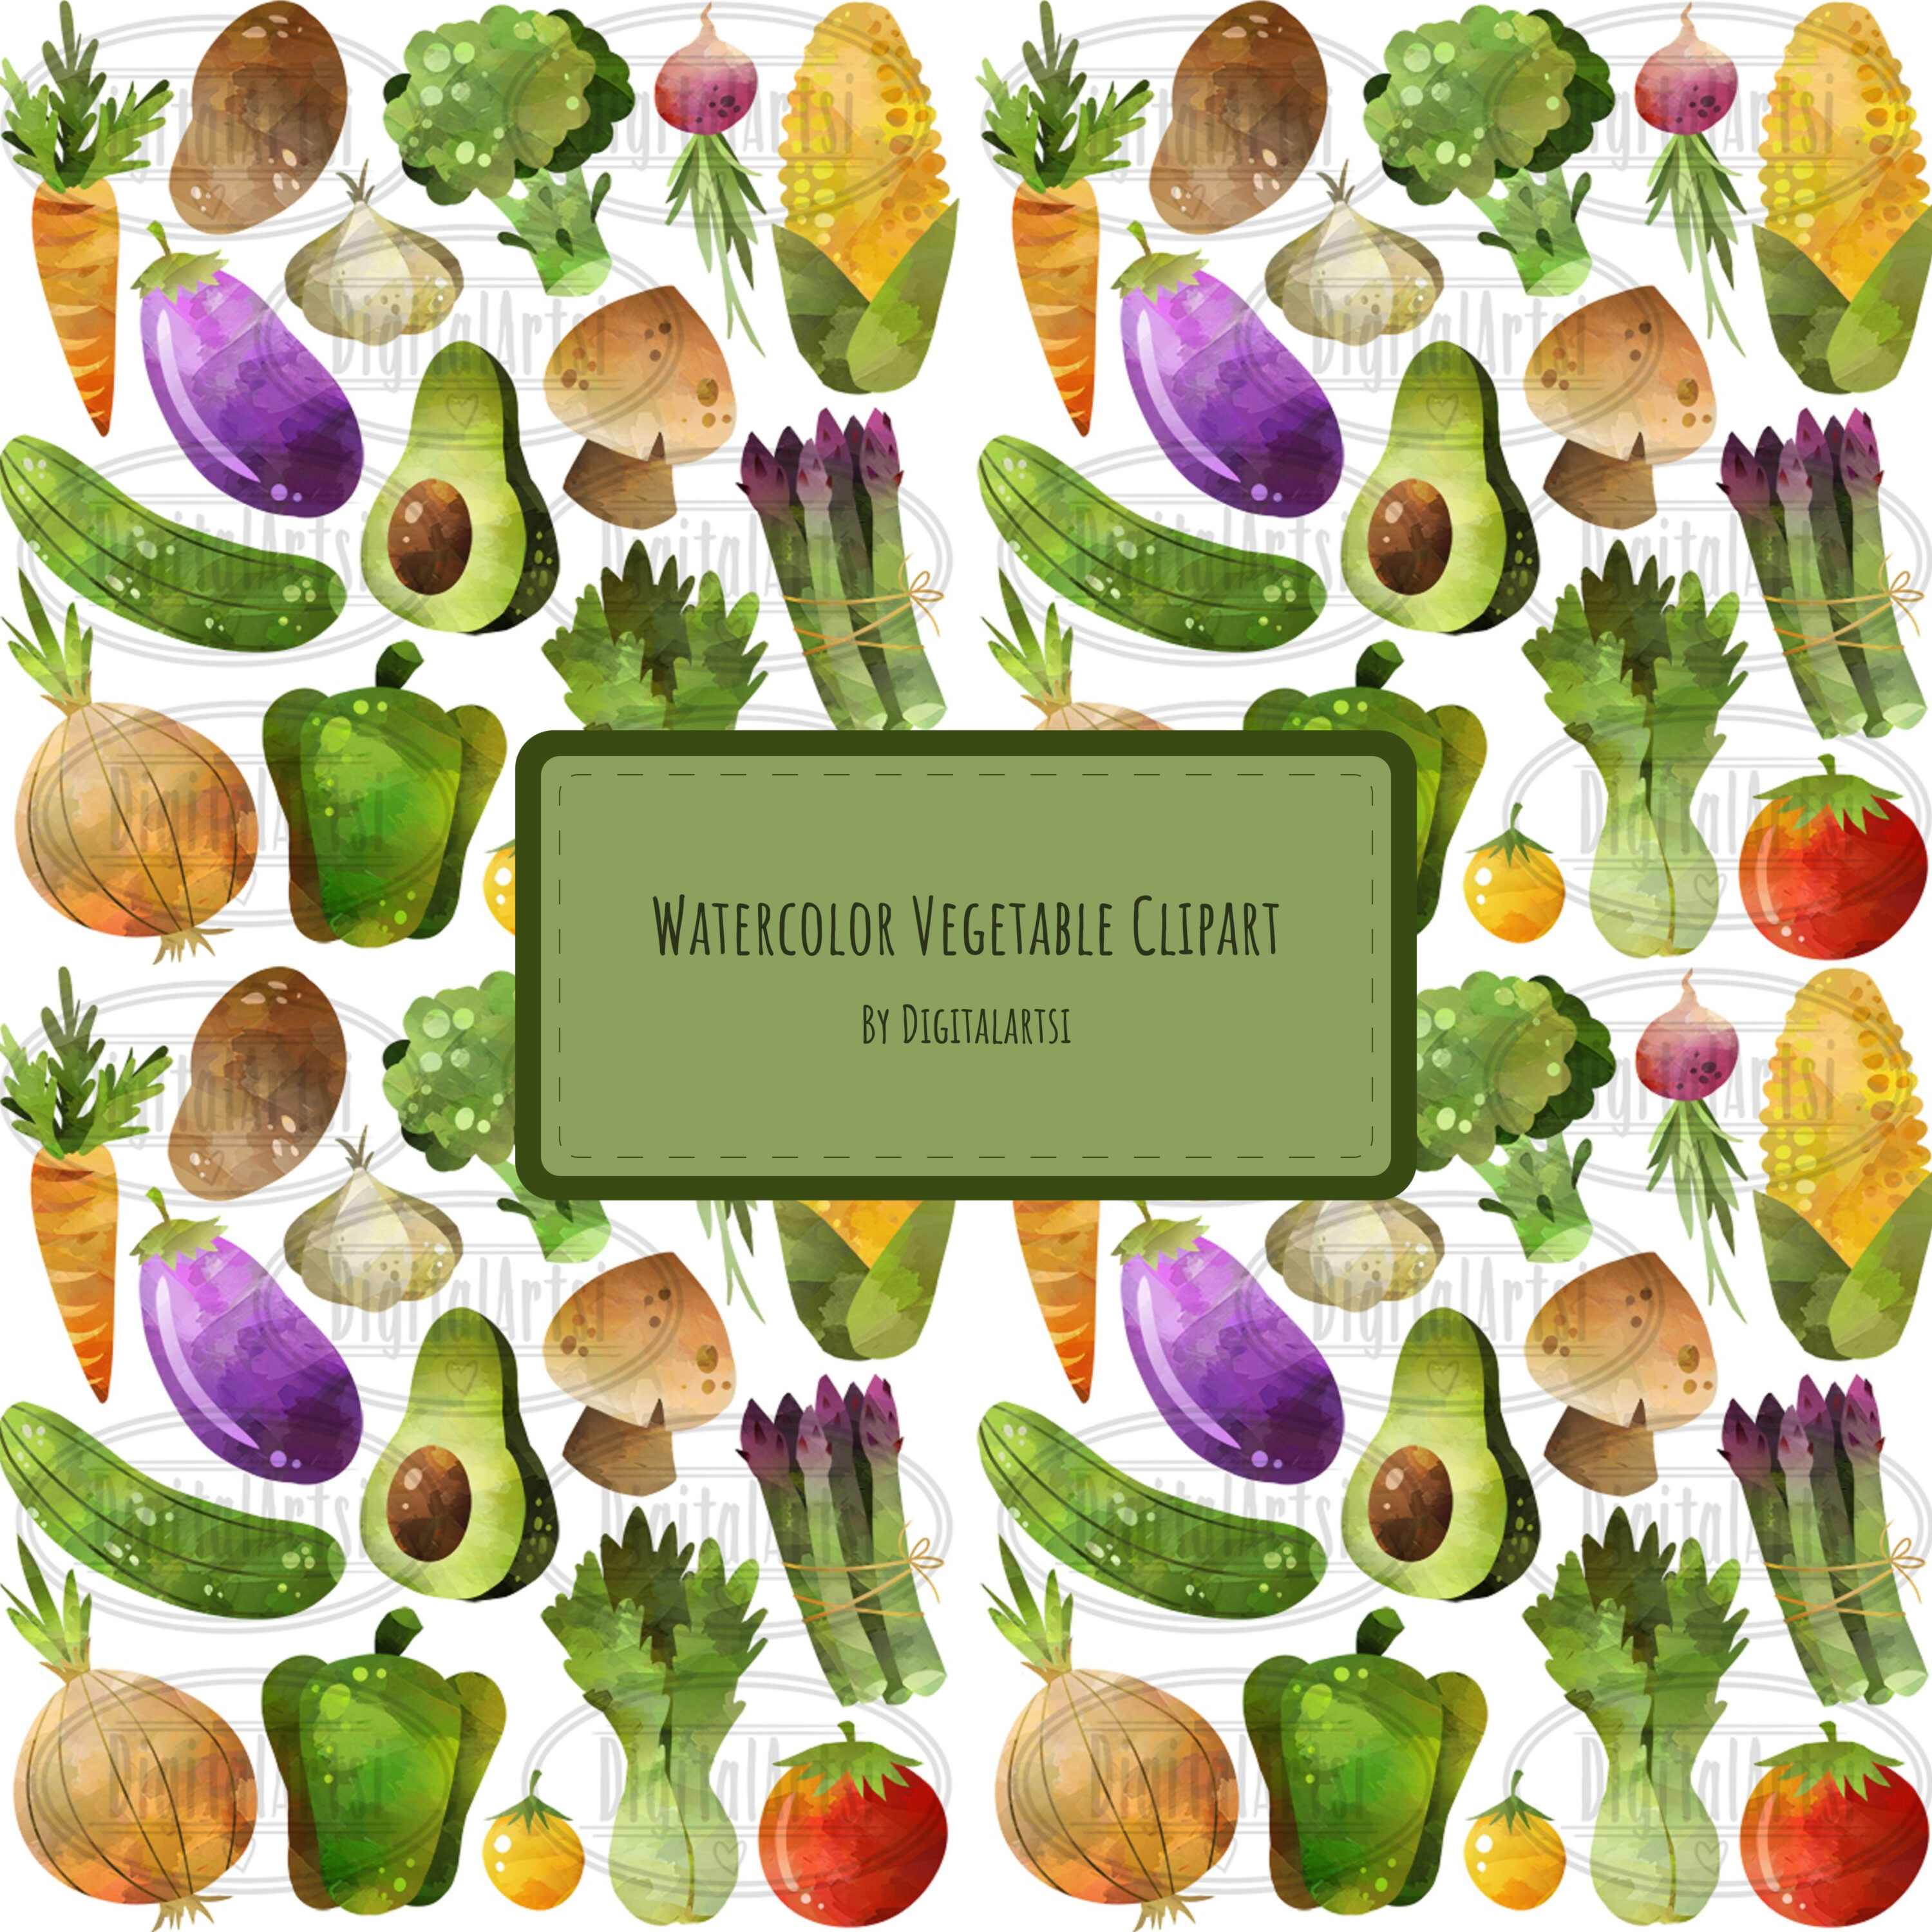 Prints of watercolor vegetable clipart.